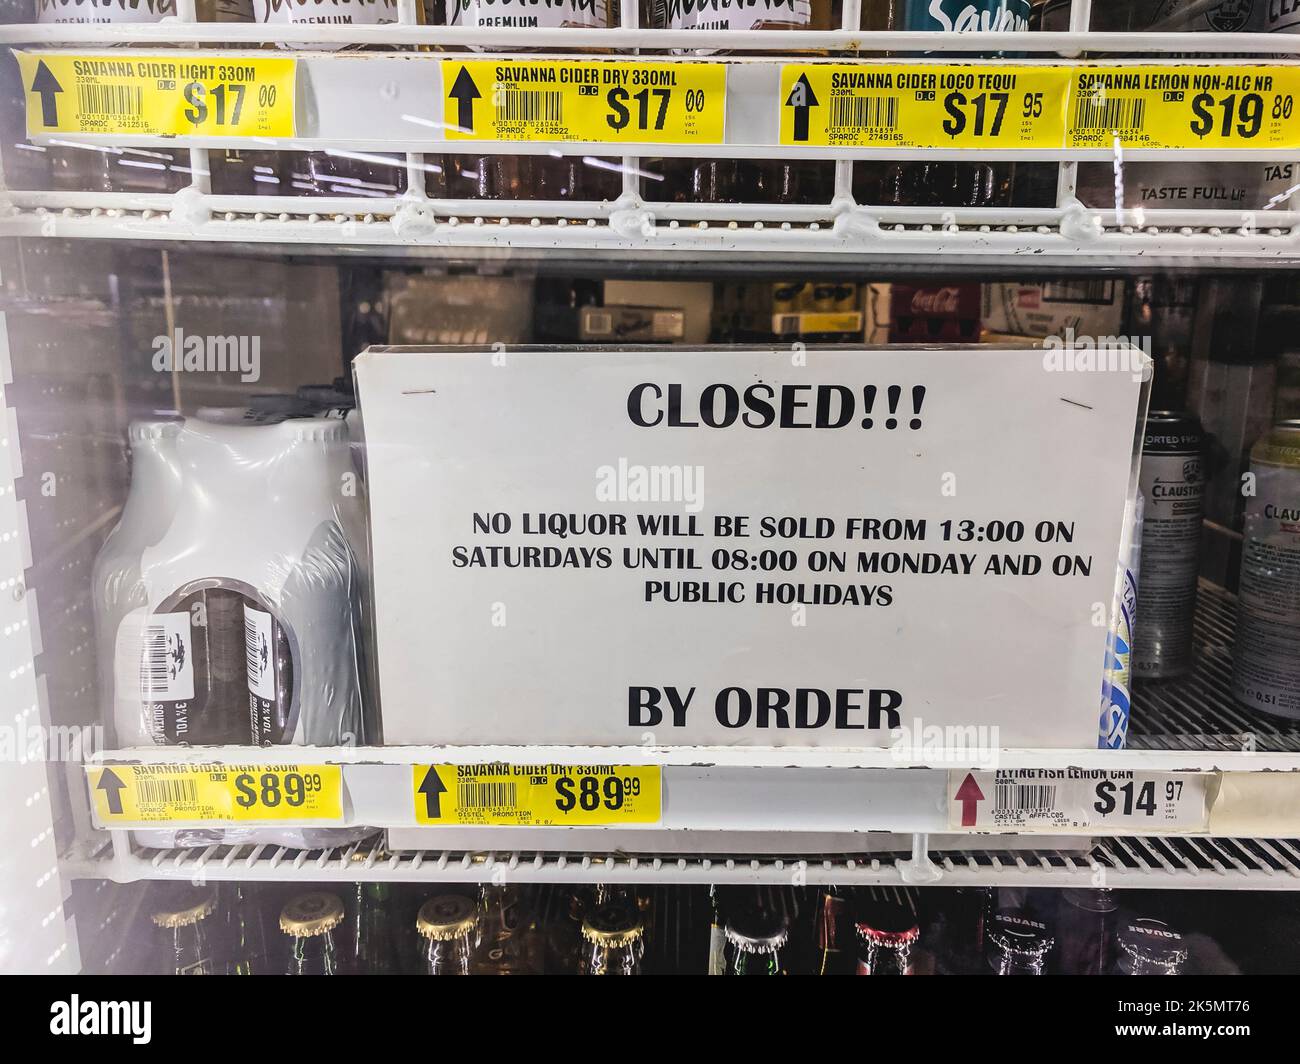 Sign in a beer fridge in a supermarket saying 'Closed!!! No liquor will be sold from 13:00 on Saturdays until 08:00 on Monday and on public holidays.  By order', Namibia Stock Photo